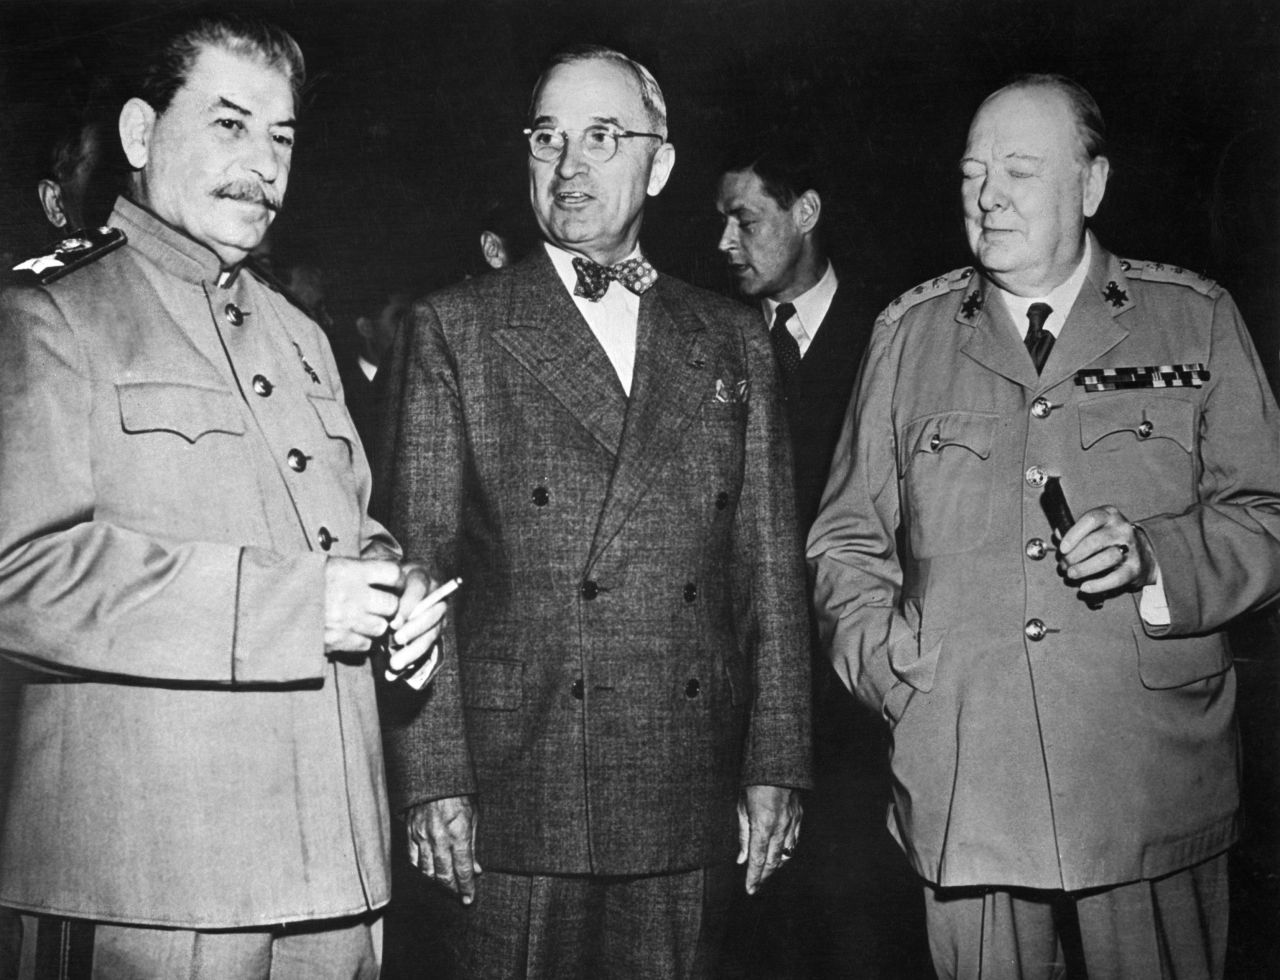 Harry S. Truman stands between Sir Winston Churchill, right, and Soviet leader Joseph Stalin at a meeting in Potsdam, Germany, in 1946 after World War II ended.